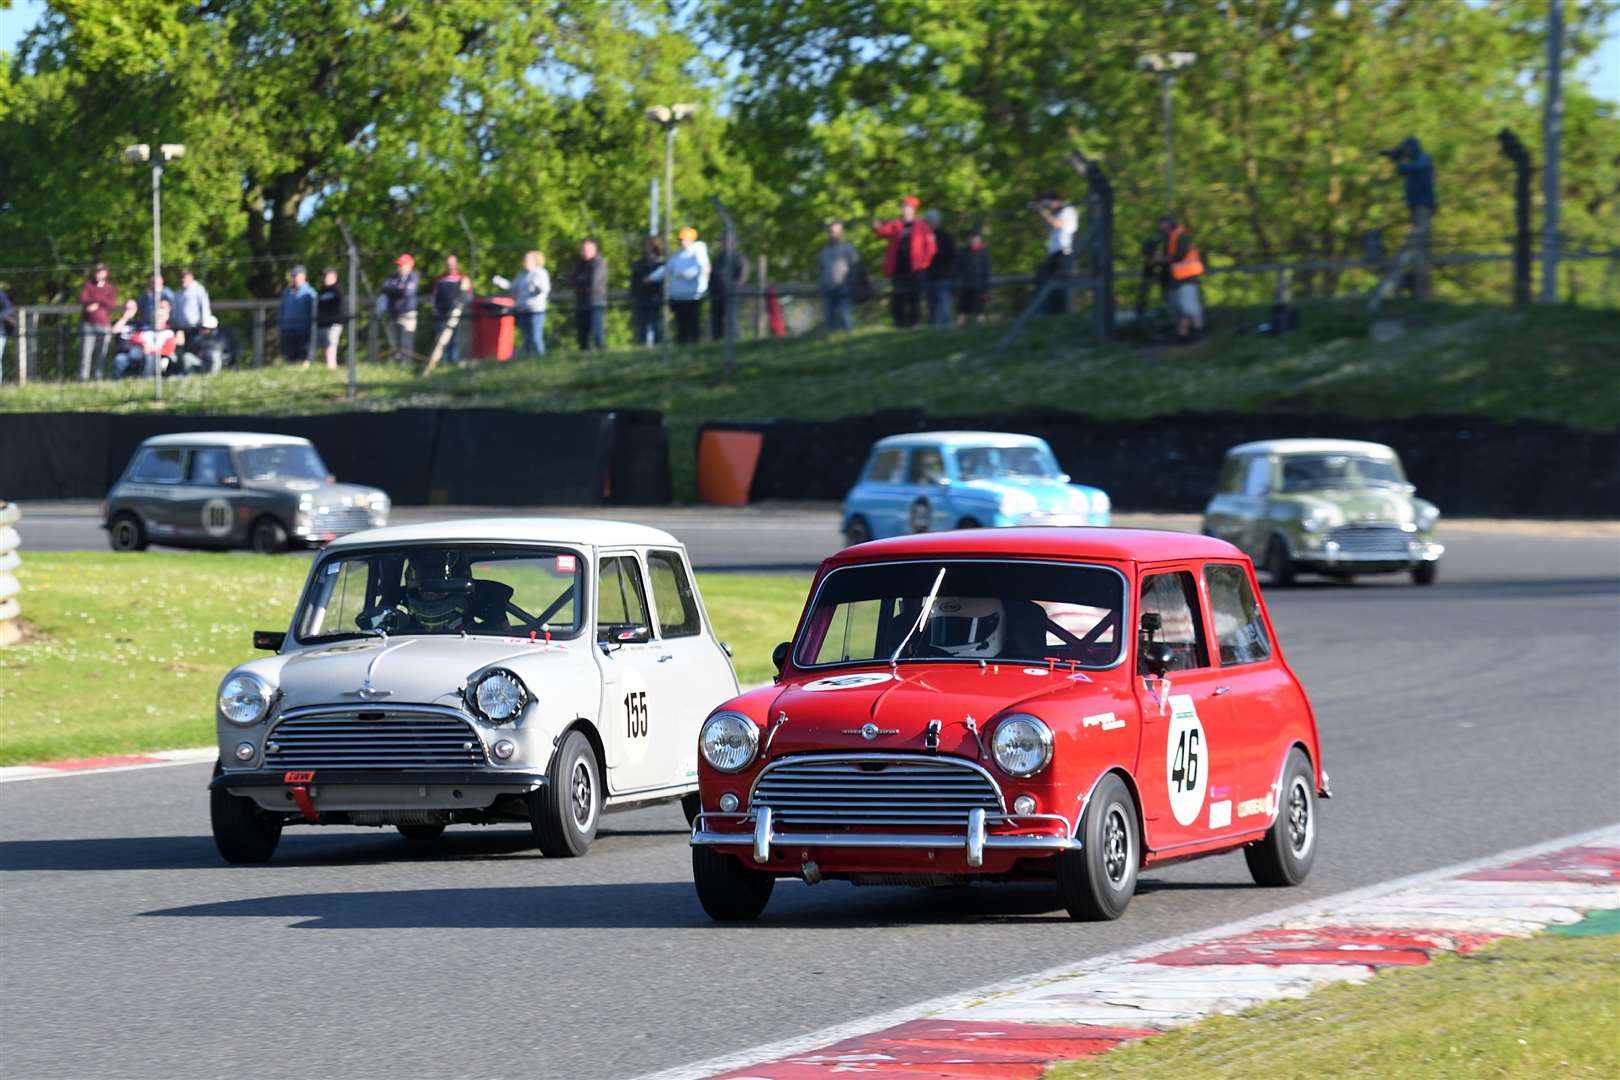 Ian Curley (46), from Marden, won both Pre-66 Mini races. Picture: Simon Hildrew